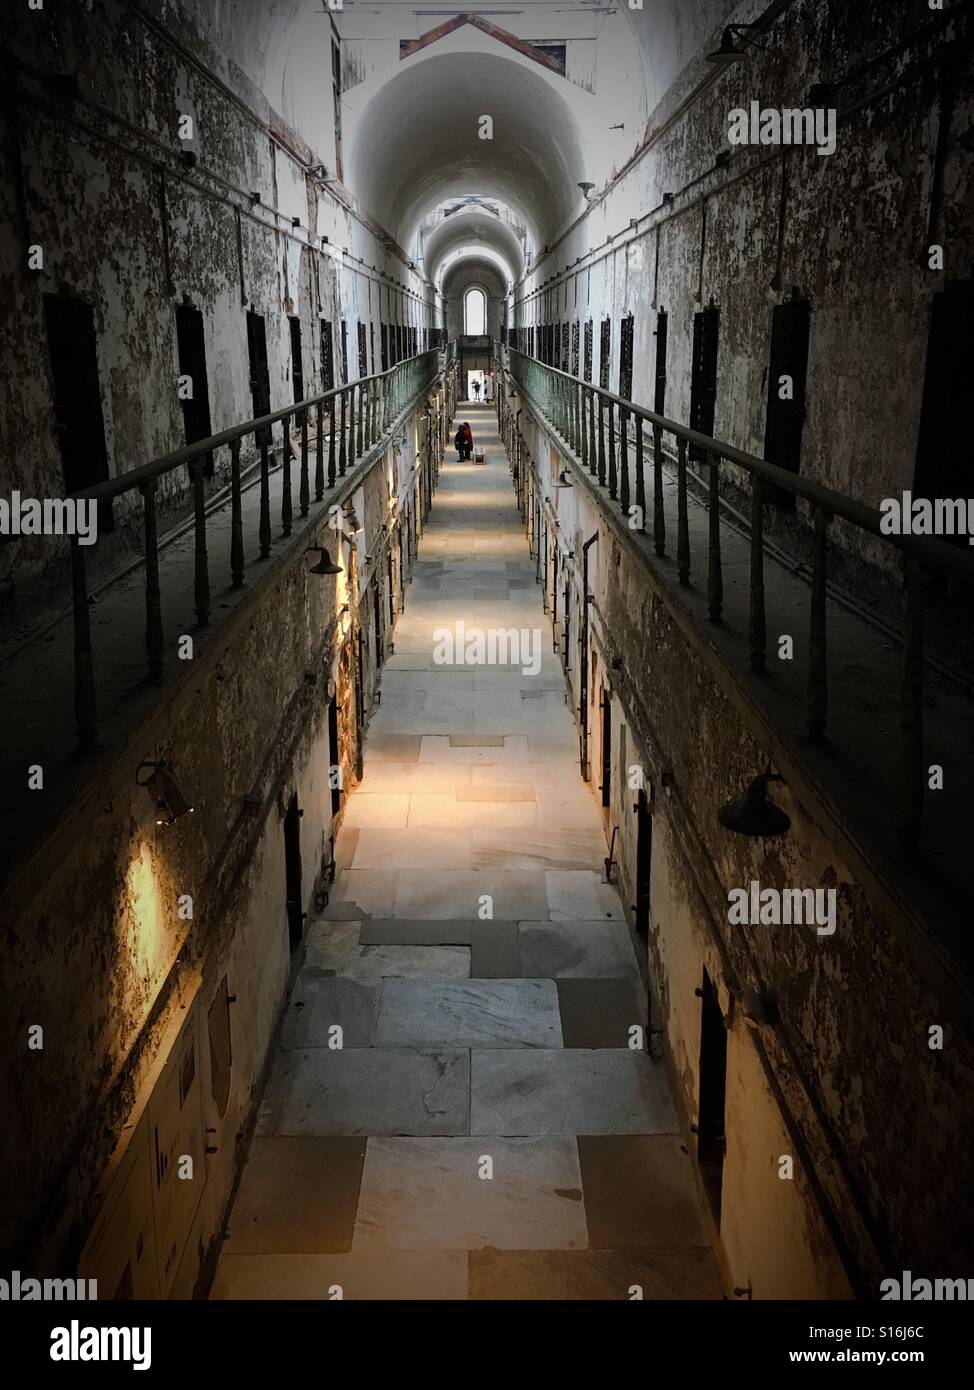 Eastern State Penitentiary cell block Stock Photo